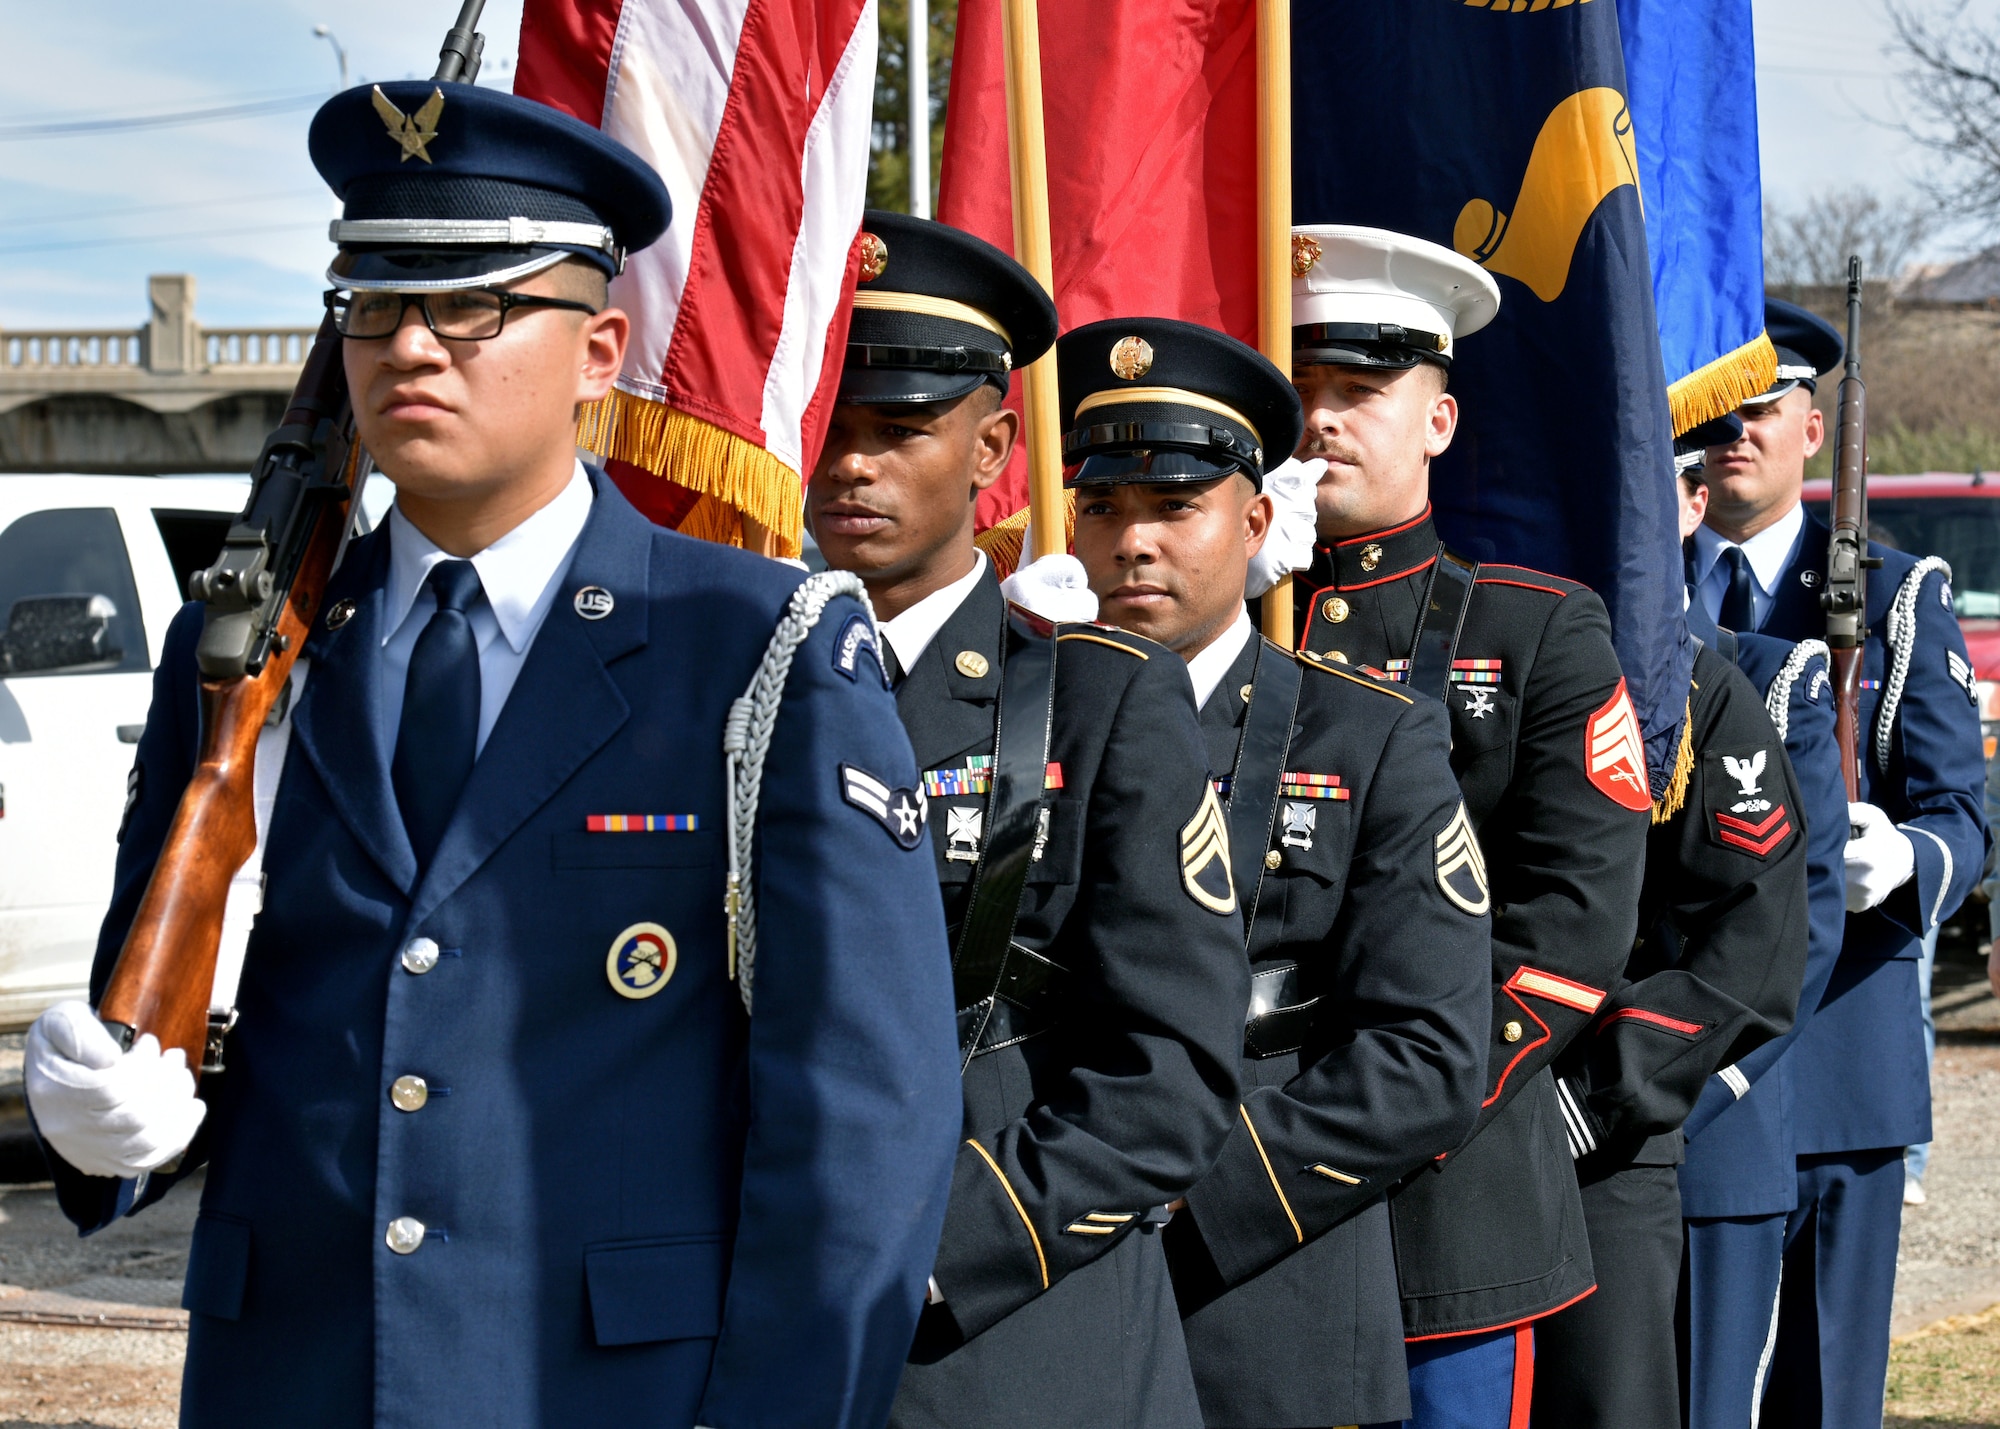 The Goodfellow Air Force Base Joint Service Color Guard present the colors during the San Angelo Support for Veterans Honor Ceremony at the Bill Aylor Sr. Memorial Riverstage in San Angelo, Texas, Dec. 5, 2019. The primary purpose of the Joint Service Color Guard is to present the National Colors at a presentation or ceremony. (U.S. Air Force photo by Airman 1st Class Robyn Hunsinger)